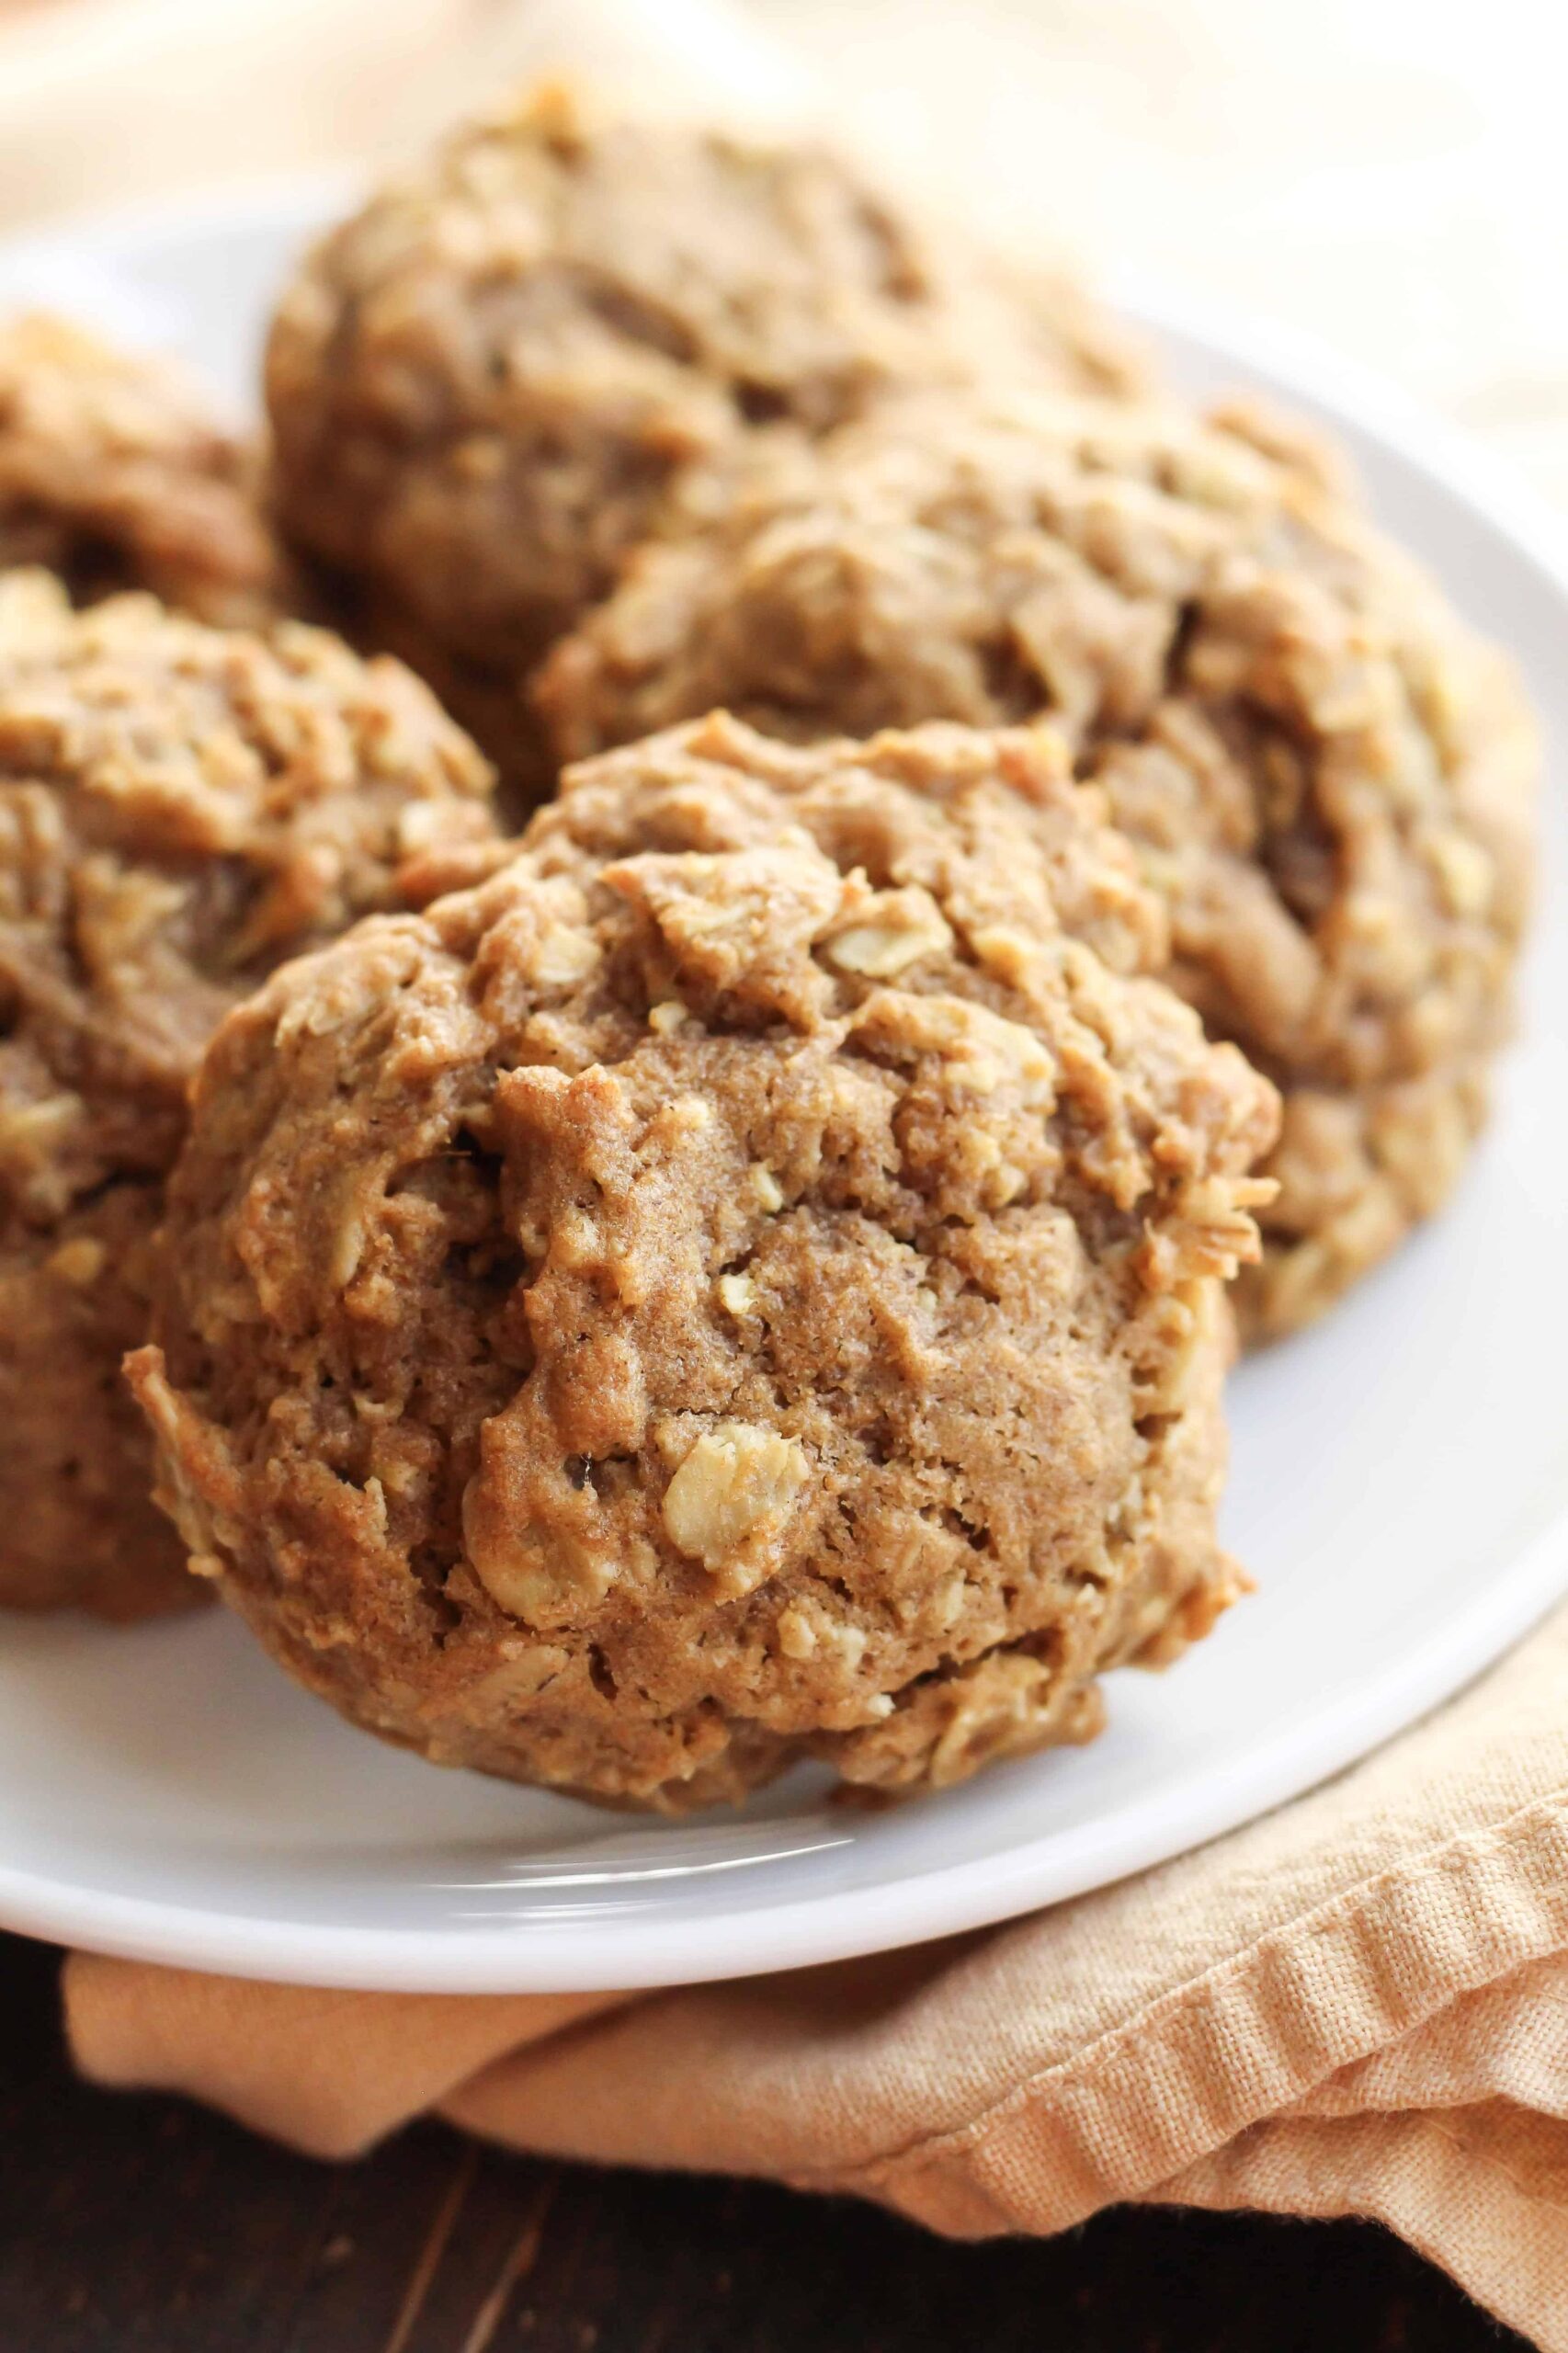  Chewy, moist, and perfectly spiced, these cookies are the ultimate fall dessert.